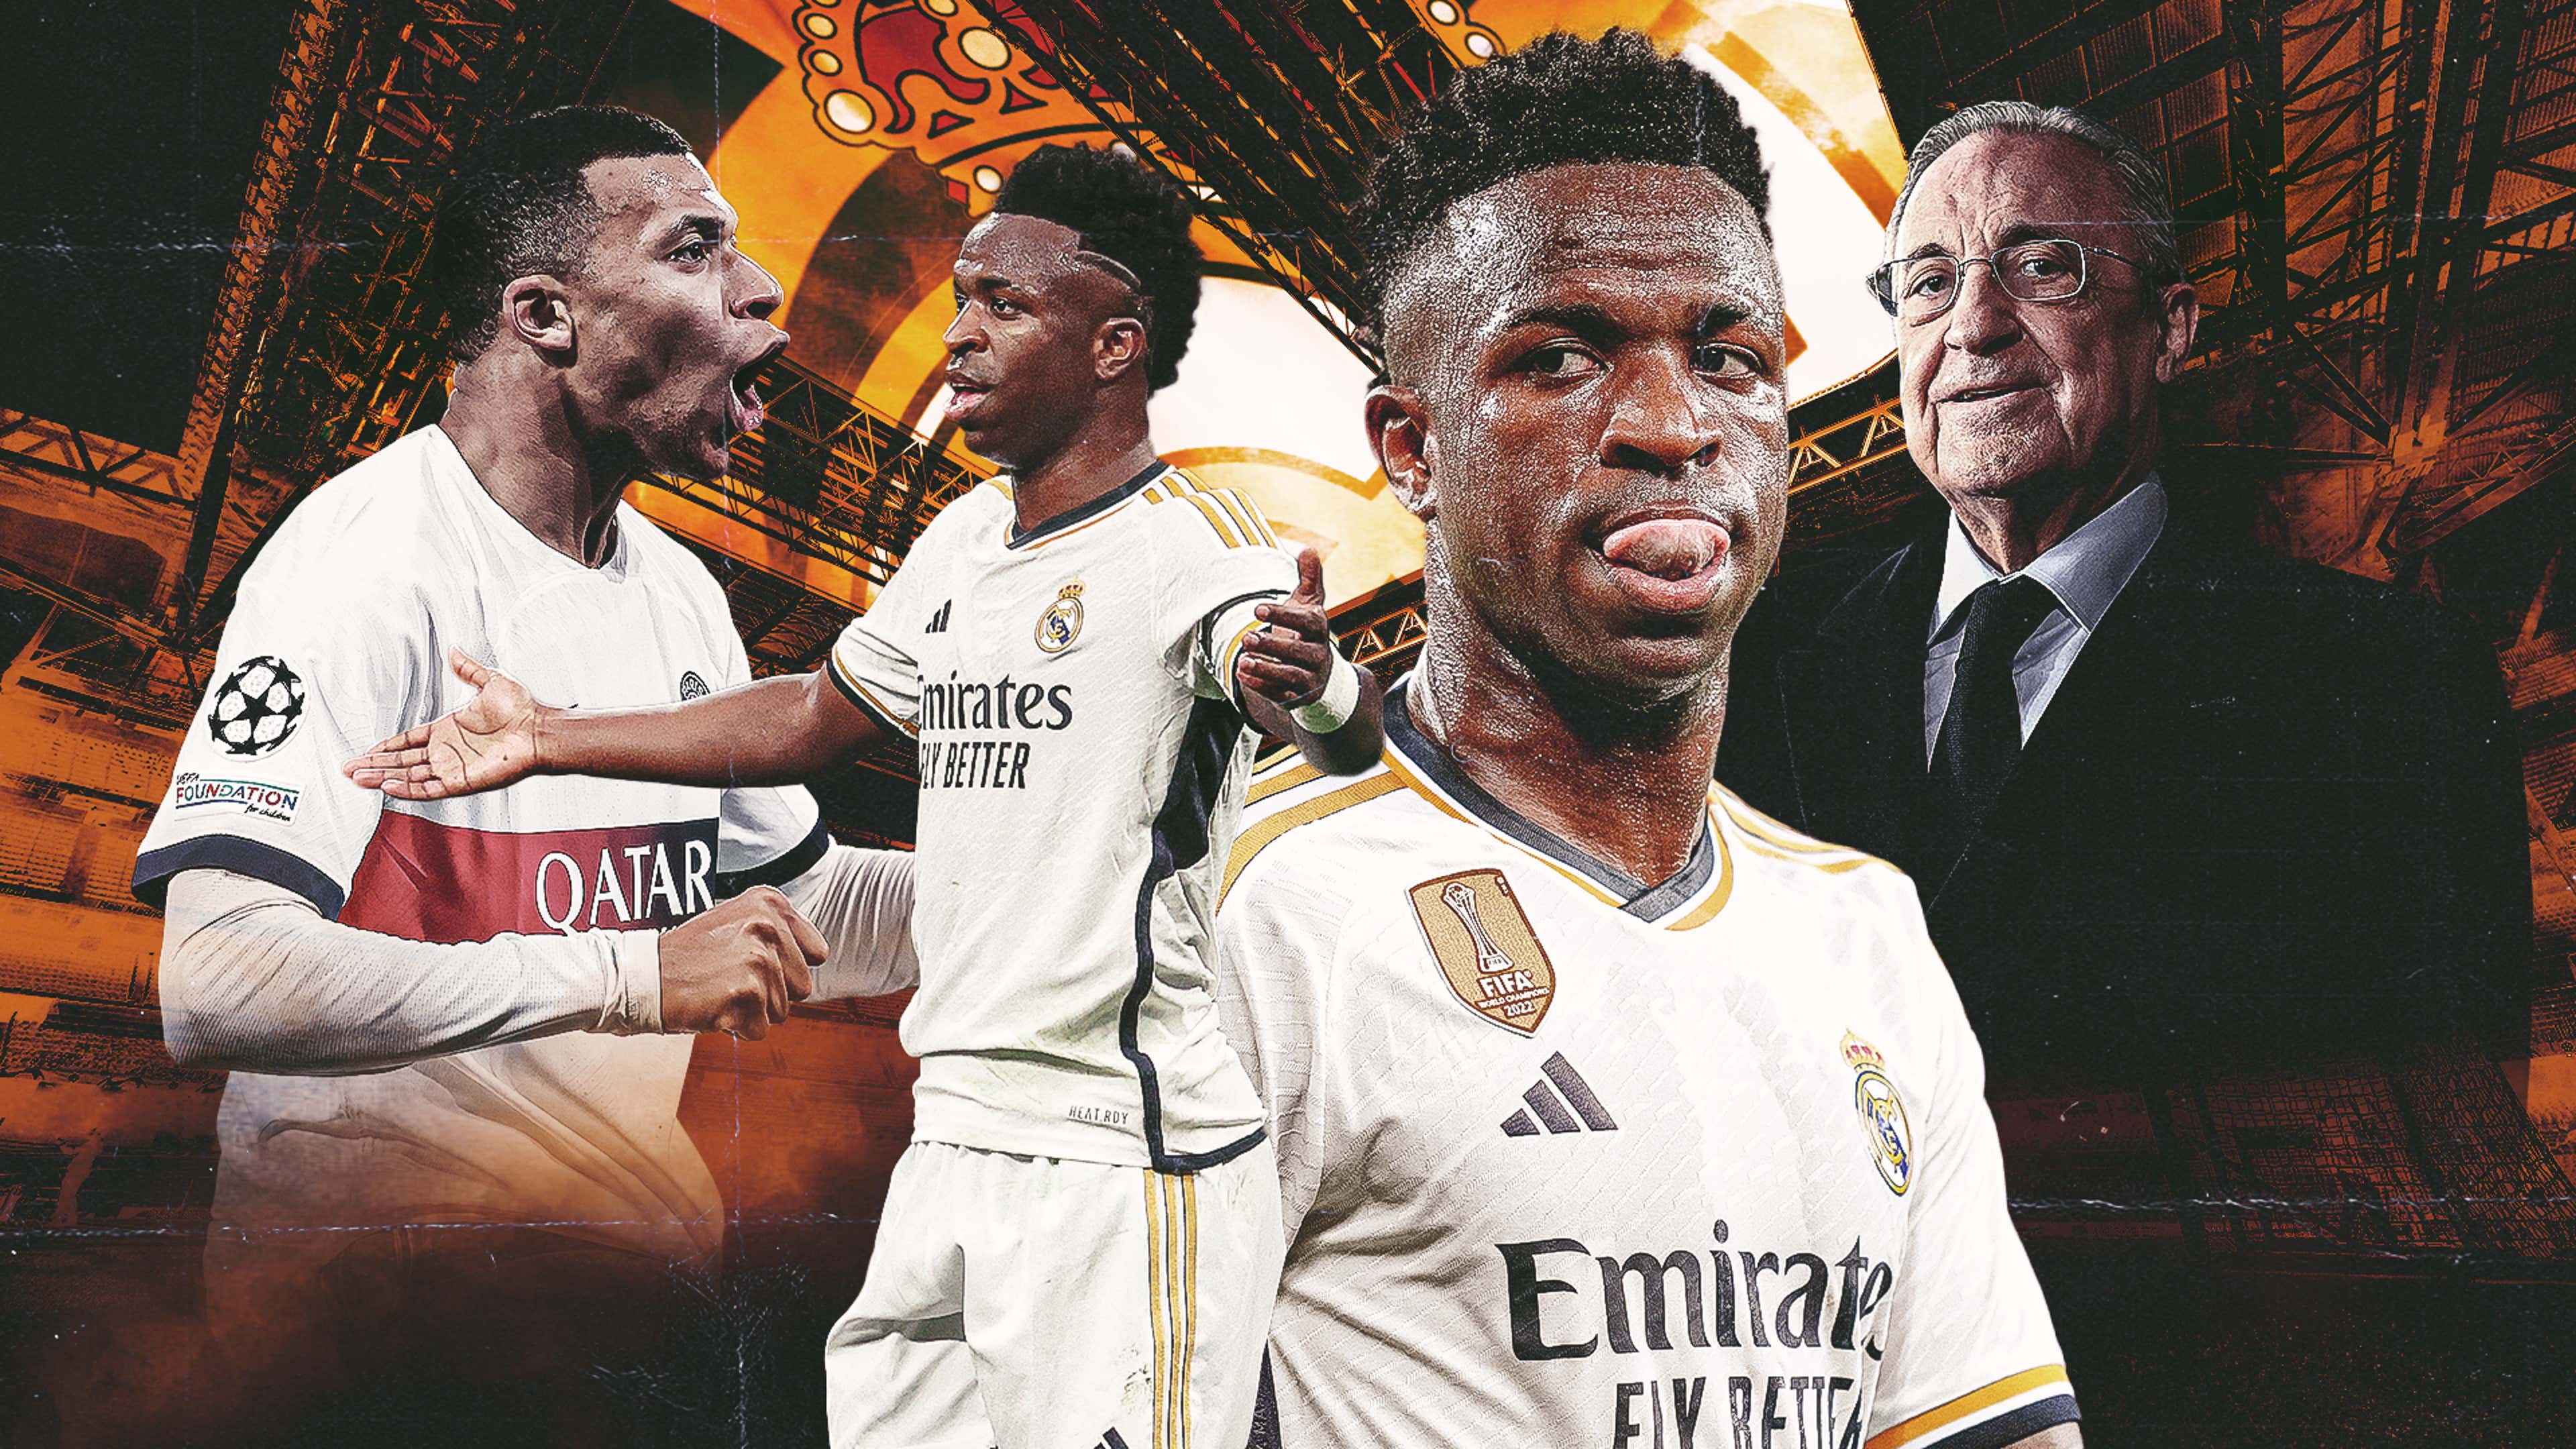 Real Madrid coach says Vinicius Jr. didn't want to continue playing in game  after racist chants